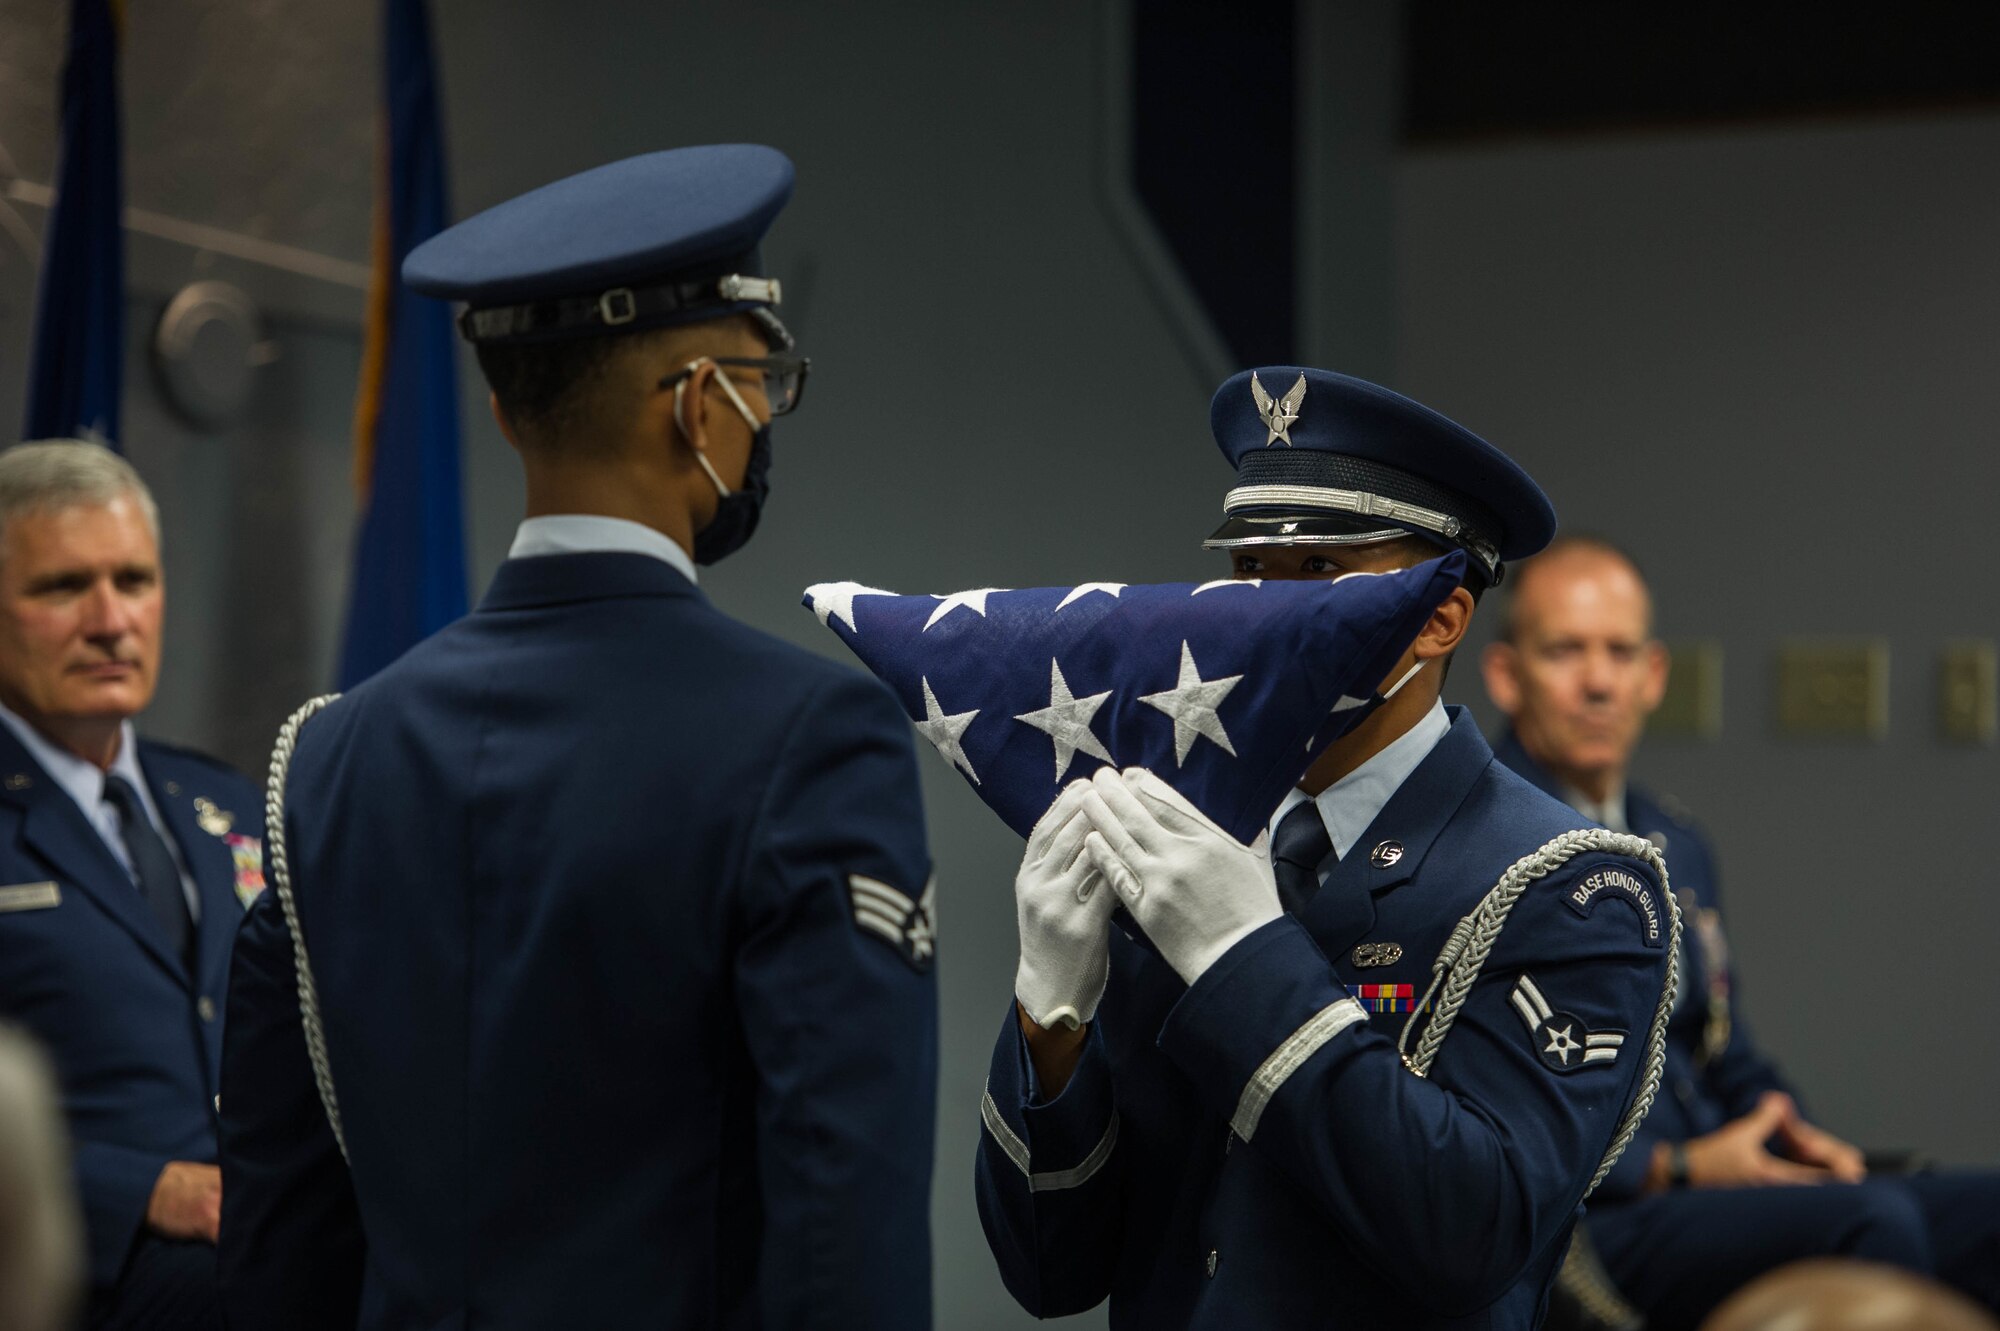 Base Honor Guard airman hands a folded American flag to another Honor Guard member.